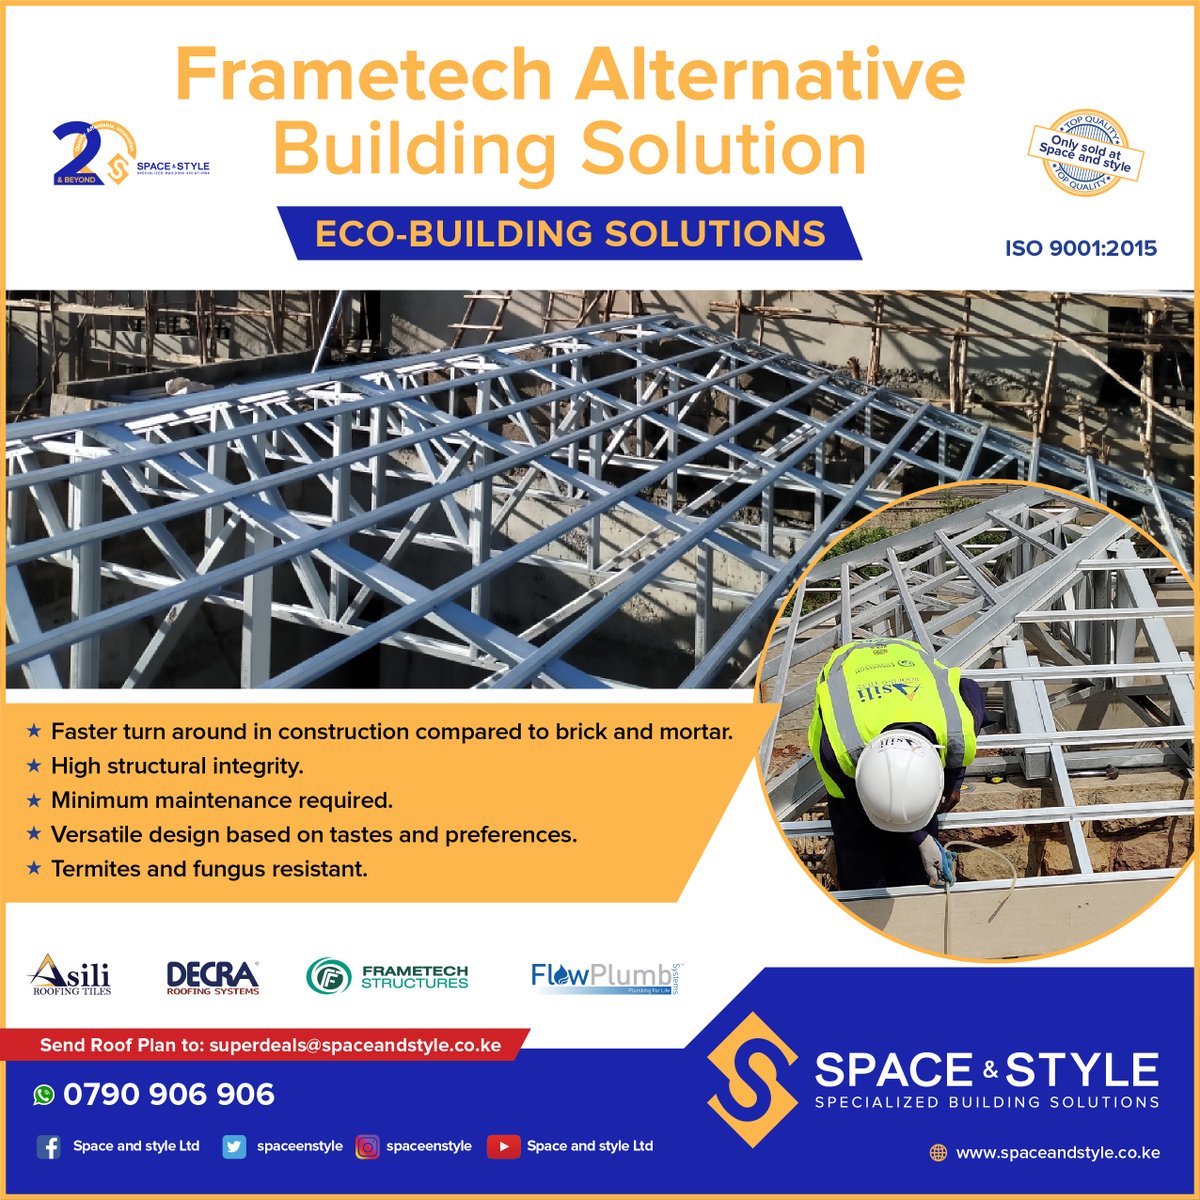 Opt for light gauge steel trusses for your roof. #savetrees, save on installation time & labour costs of your roofing project. Send your roof plan to superdeals@spaceandstyle.co.ke or call 0790906906 to get started today!
#Constructionproject #Roof #ecohomes #affordablehomes